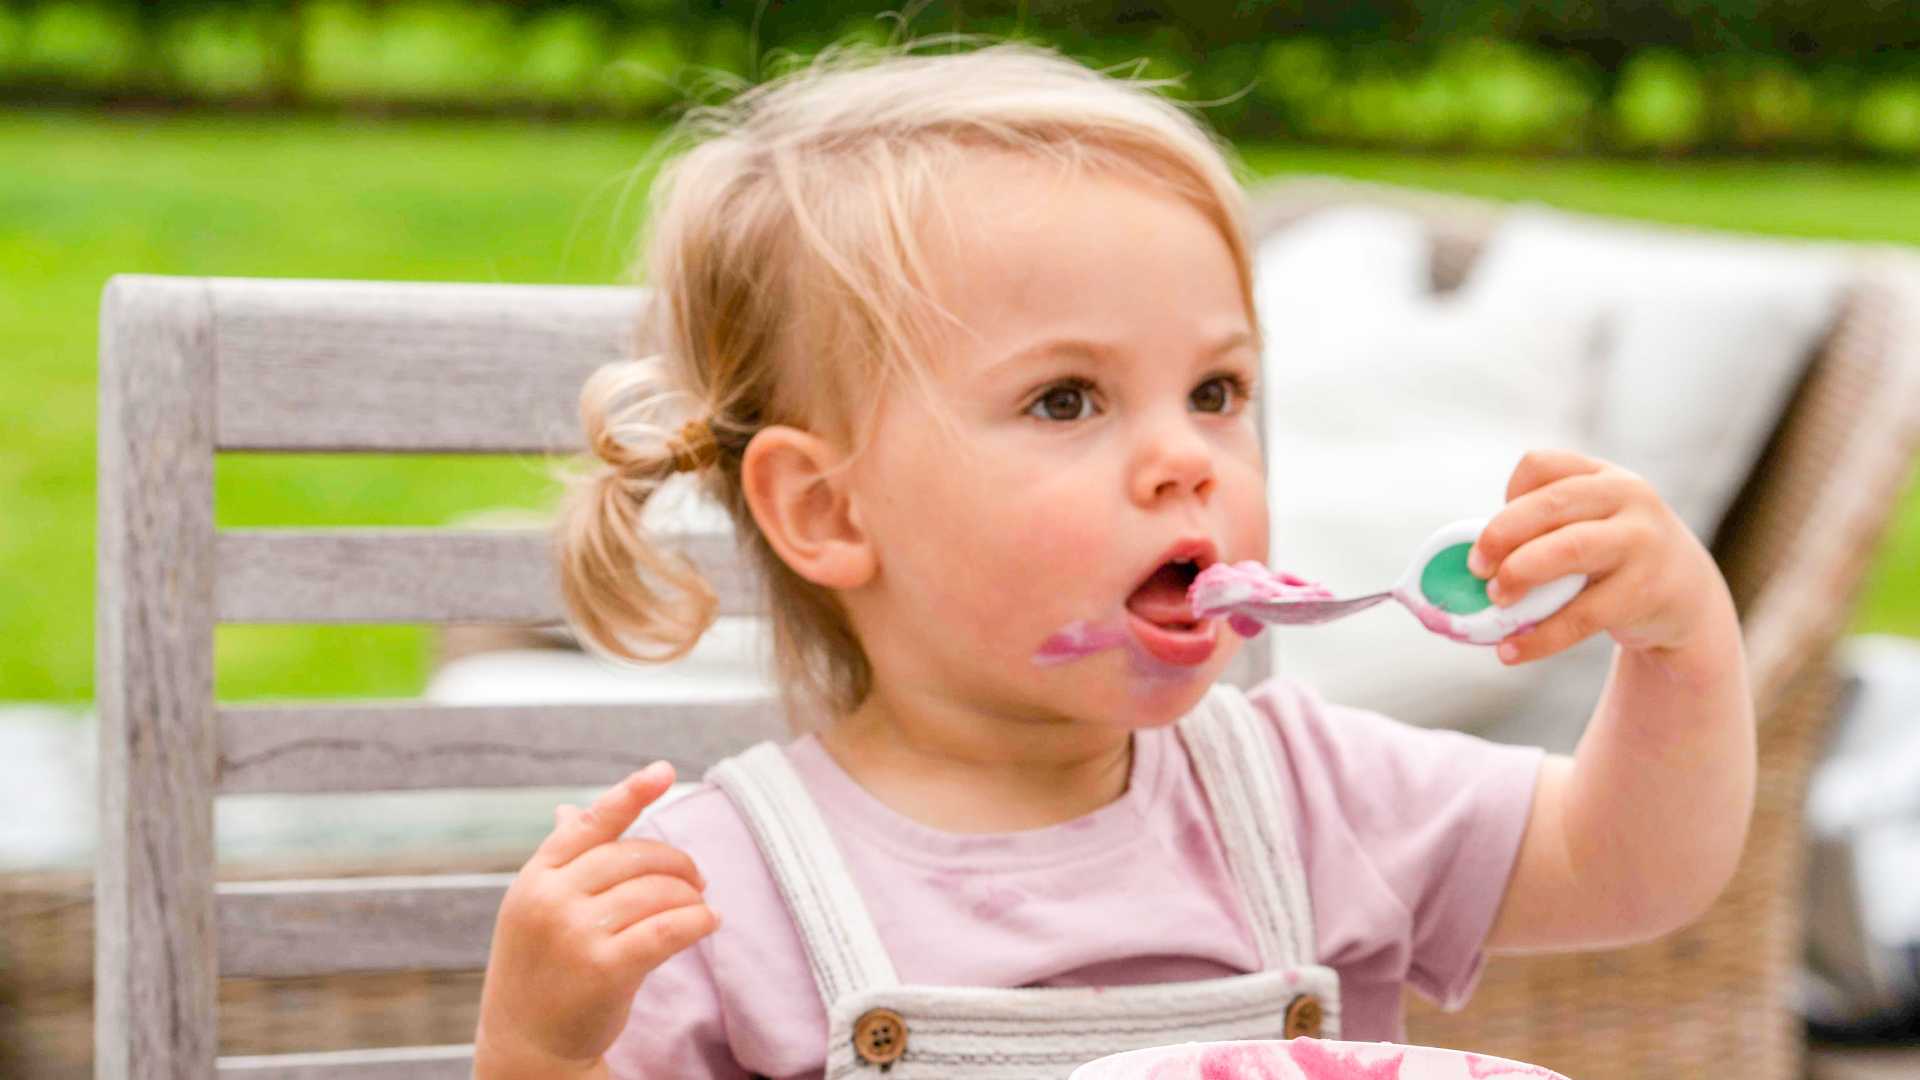 Toddler girl eating pink yoghurt with a doddl toddler spoon in a garden